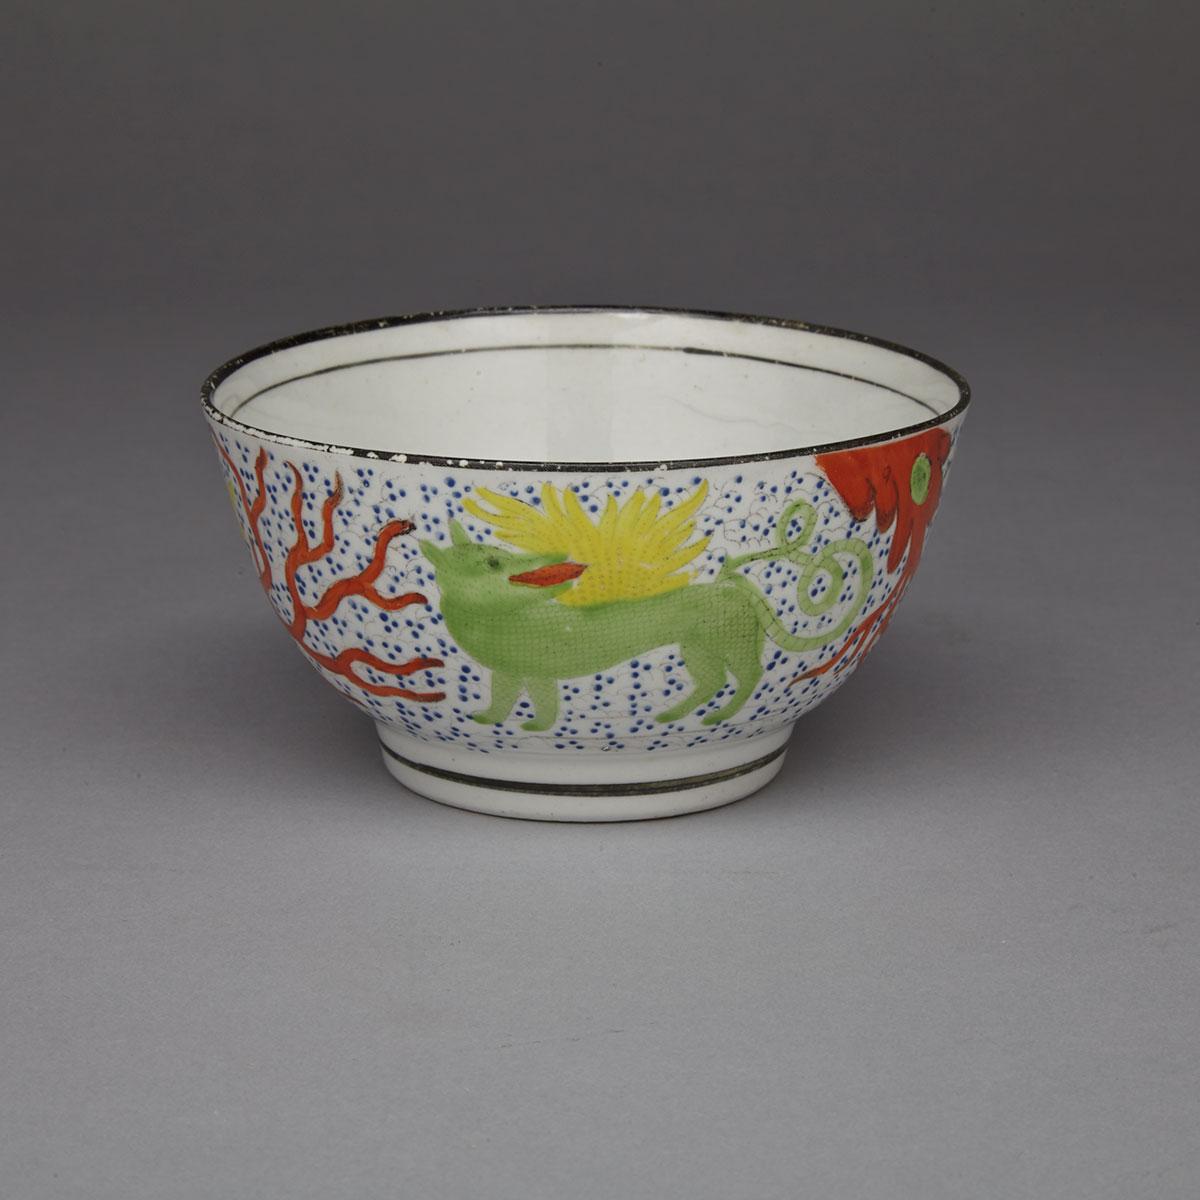 Newhall Bowl, early 19th century